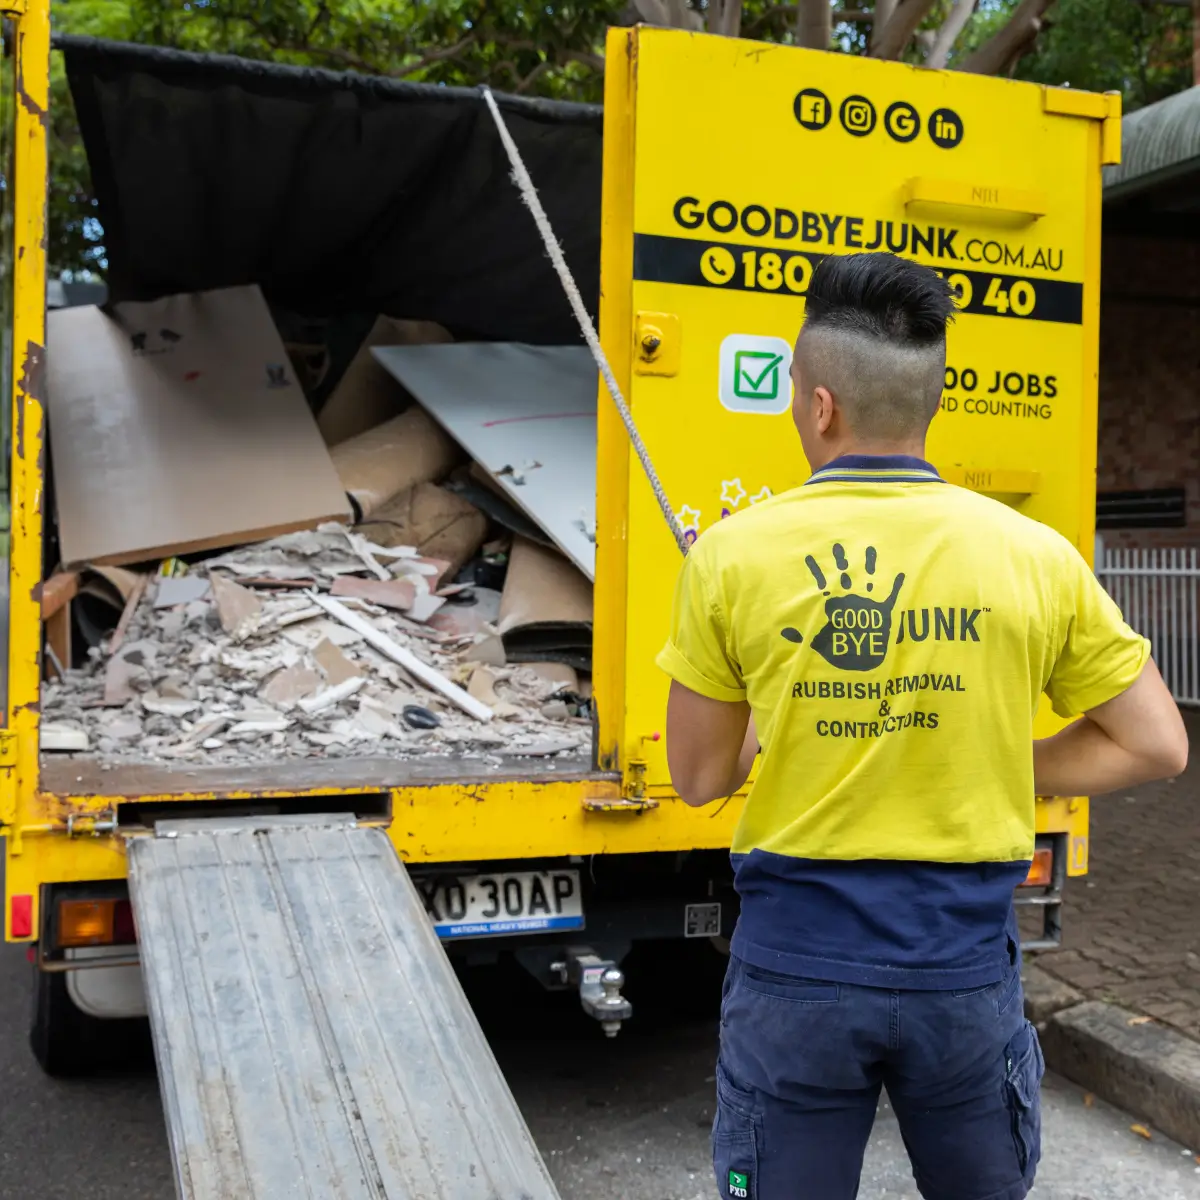 Goodbye junk workerstanding next to their yellow rubbish removal truck